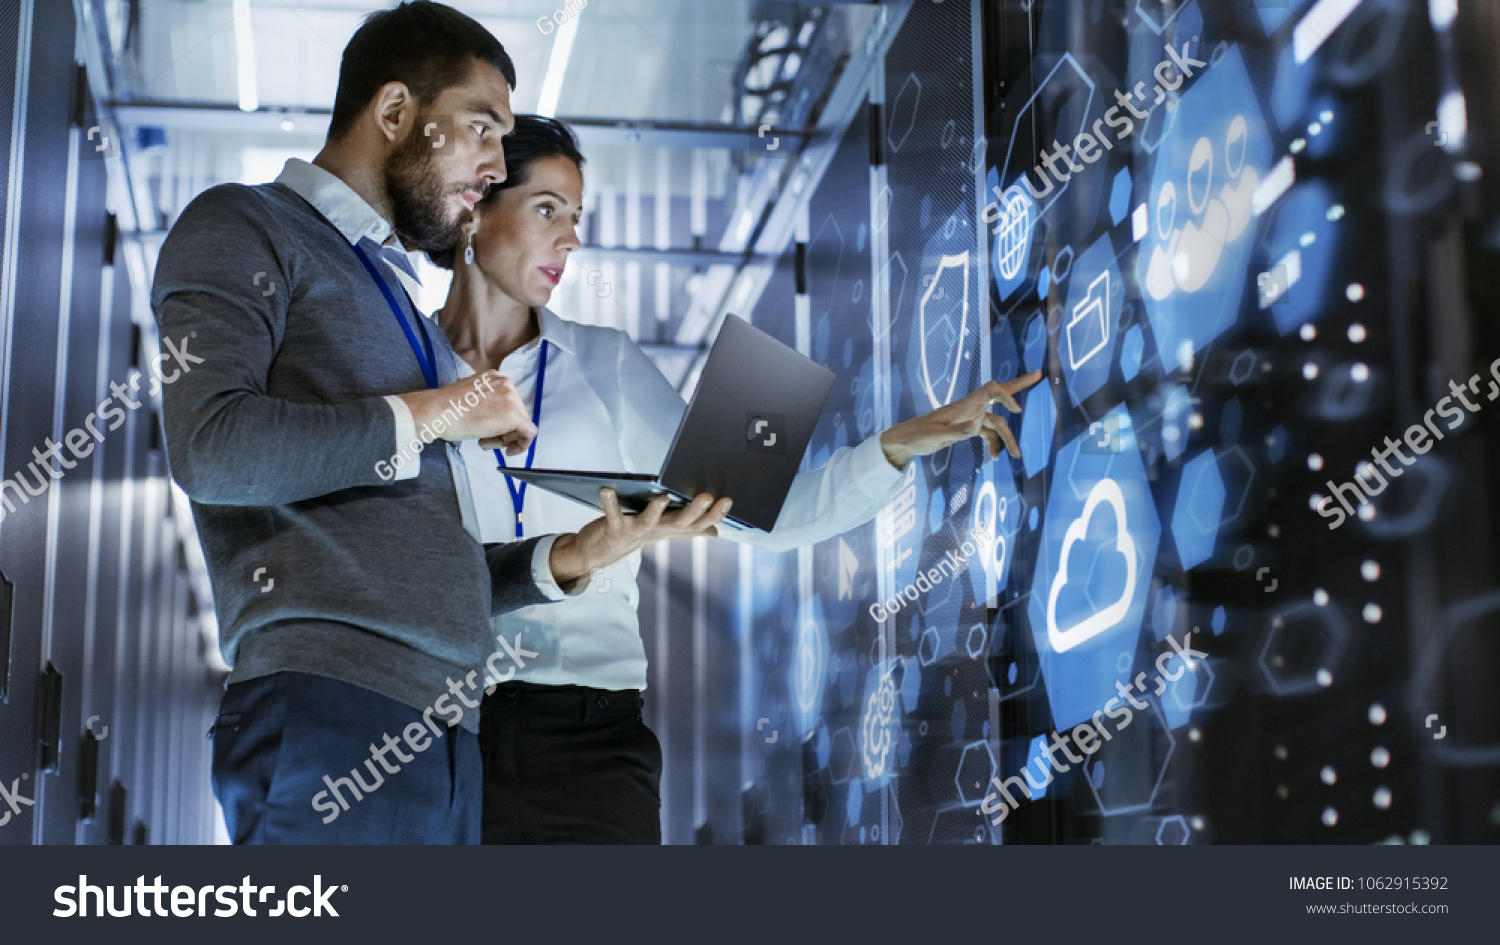 Male IT Specialist Holds Laptop and Discusses Work with Female Server Technician. They're Standing in Data Center, Rack Server Cabinet with Cloud Server Icon and Visualization. #1062915392